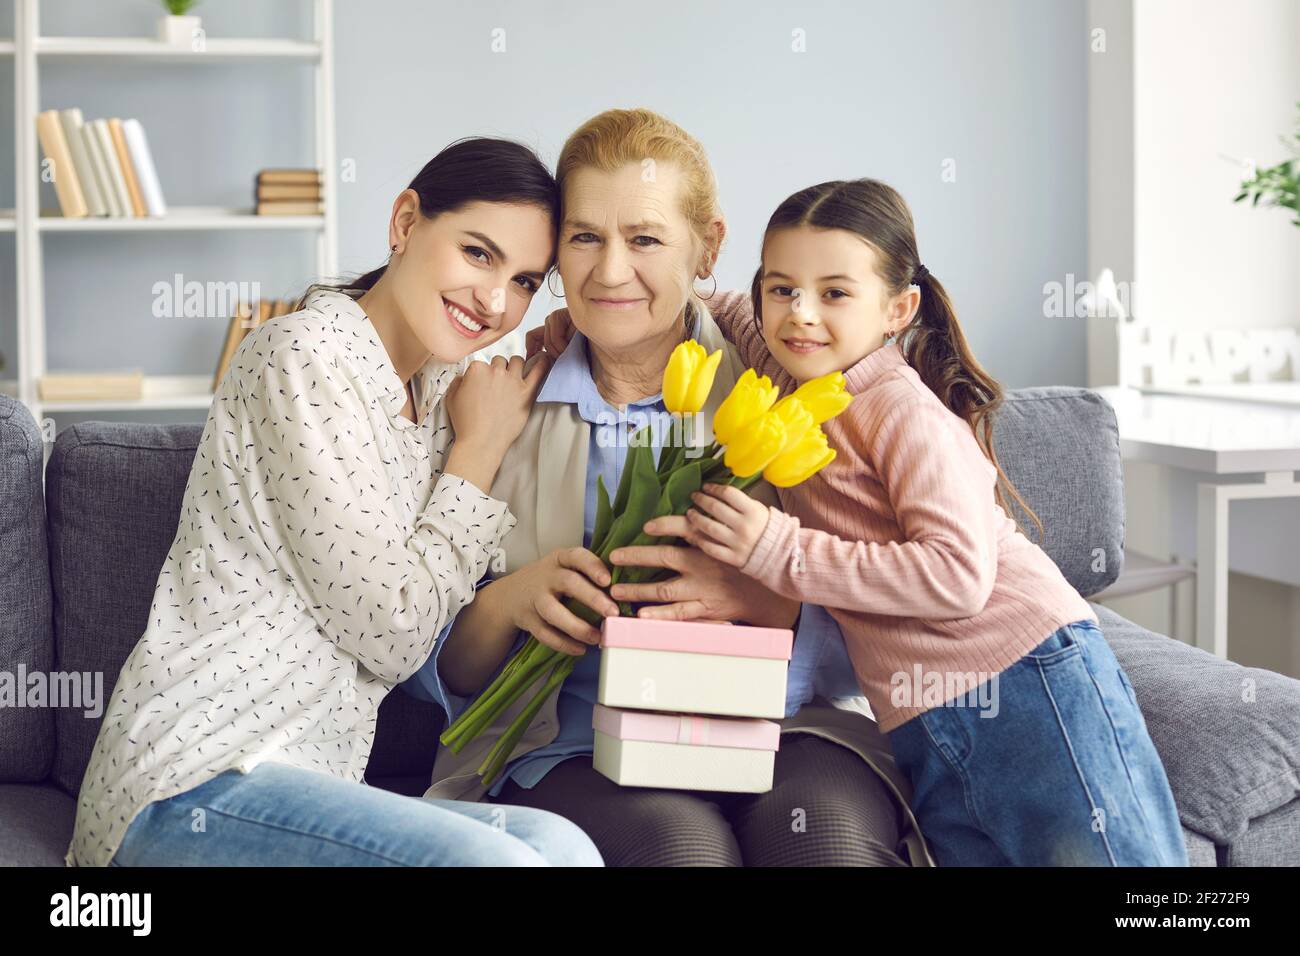 Family portrait of three generations of women celebrating who celebrate Mother's Day or Women's Day. Stock Photo